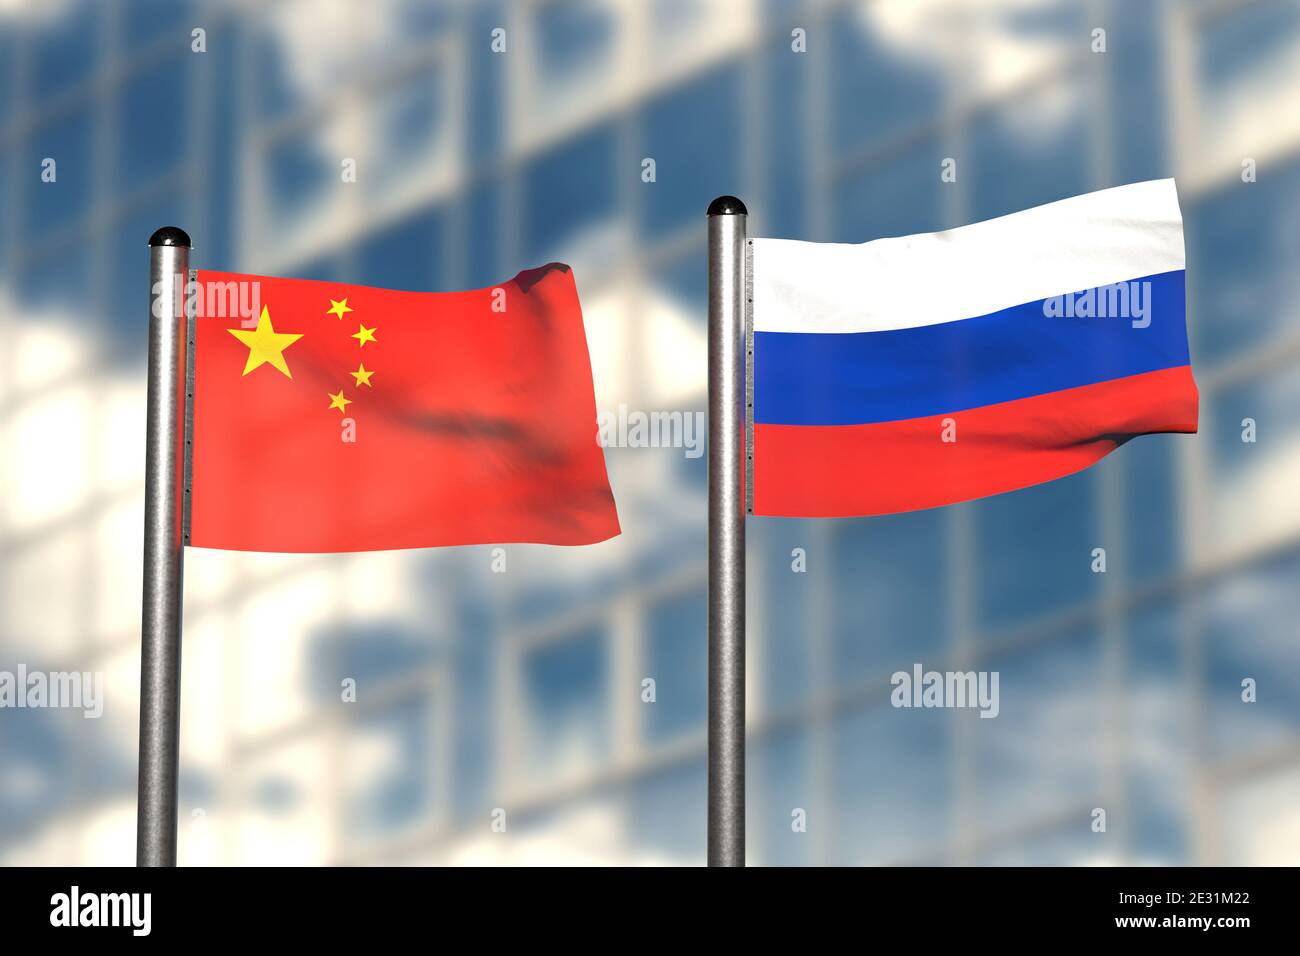 Premium Vector  Russia 3d map with national flag